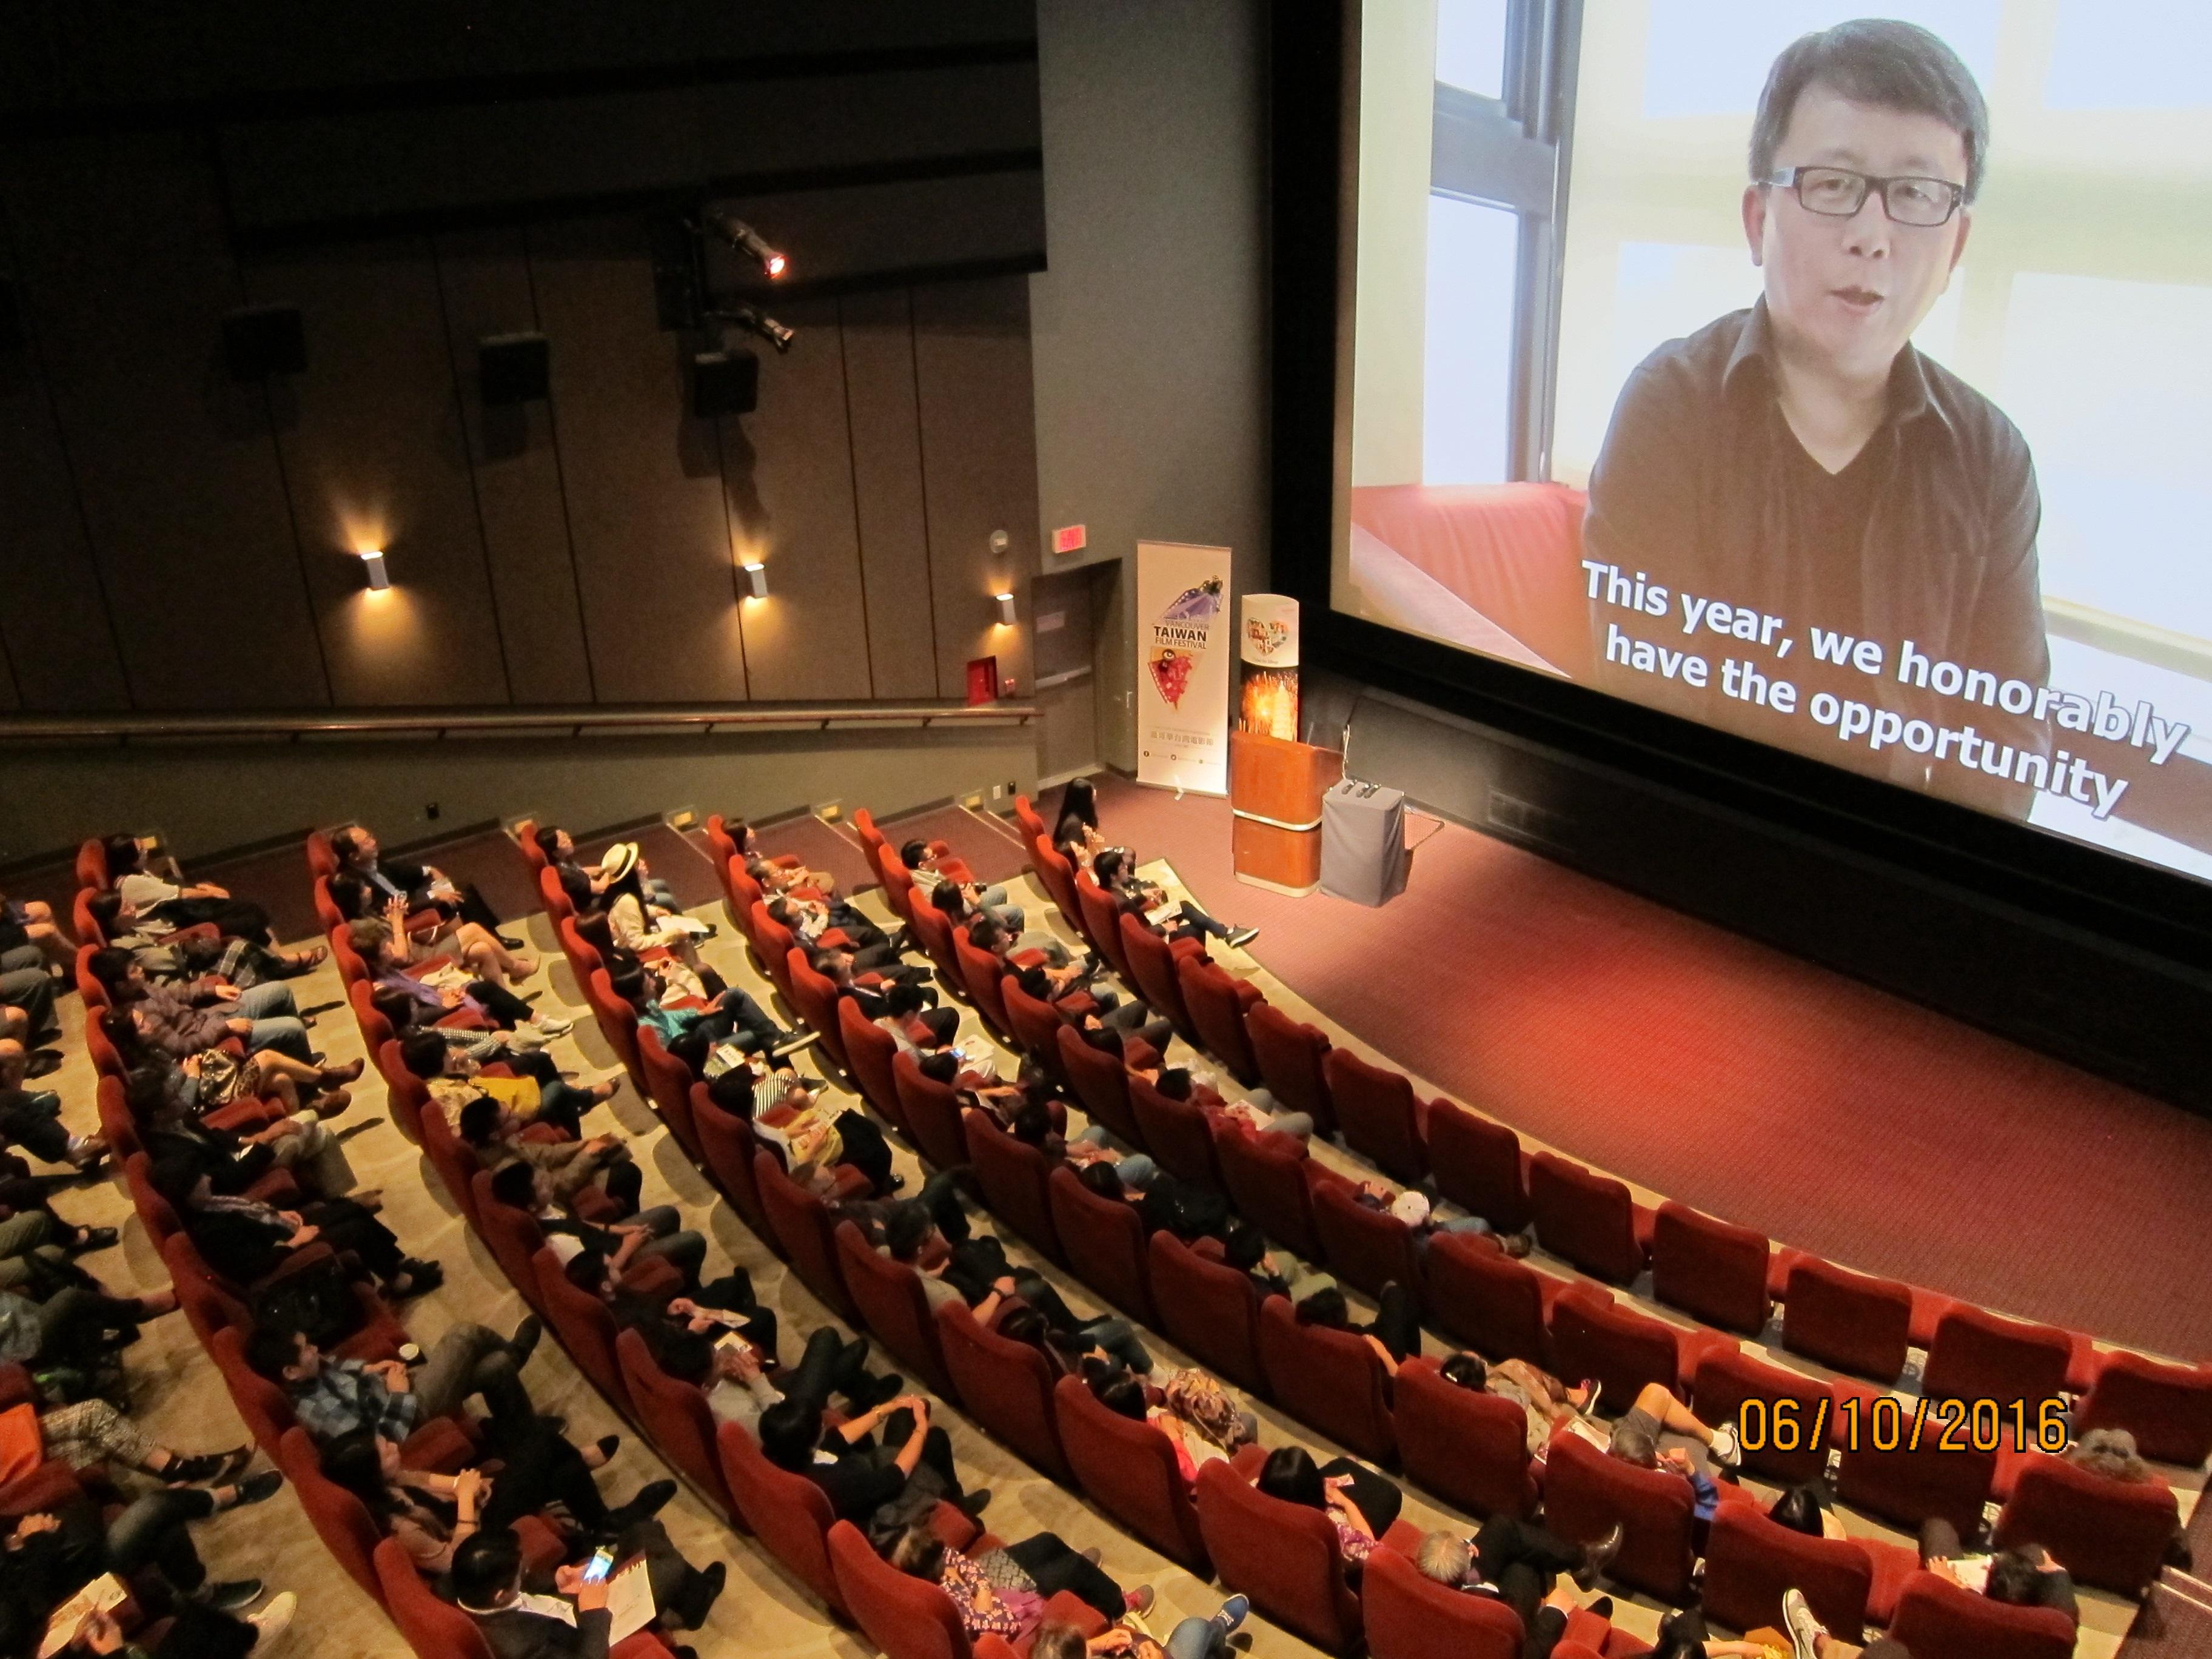 Director of the opening film "The Moment," Li-Chou Yang's video message